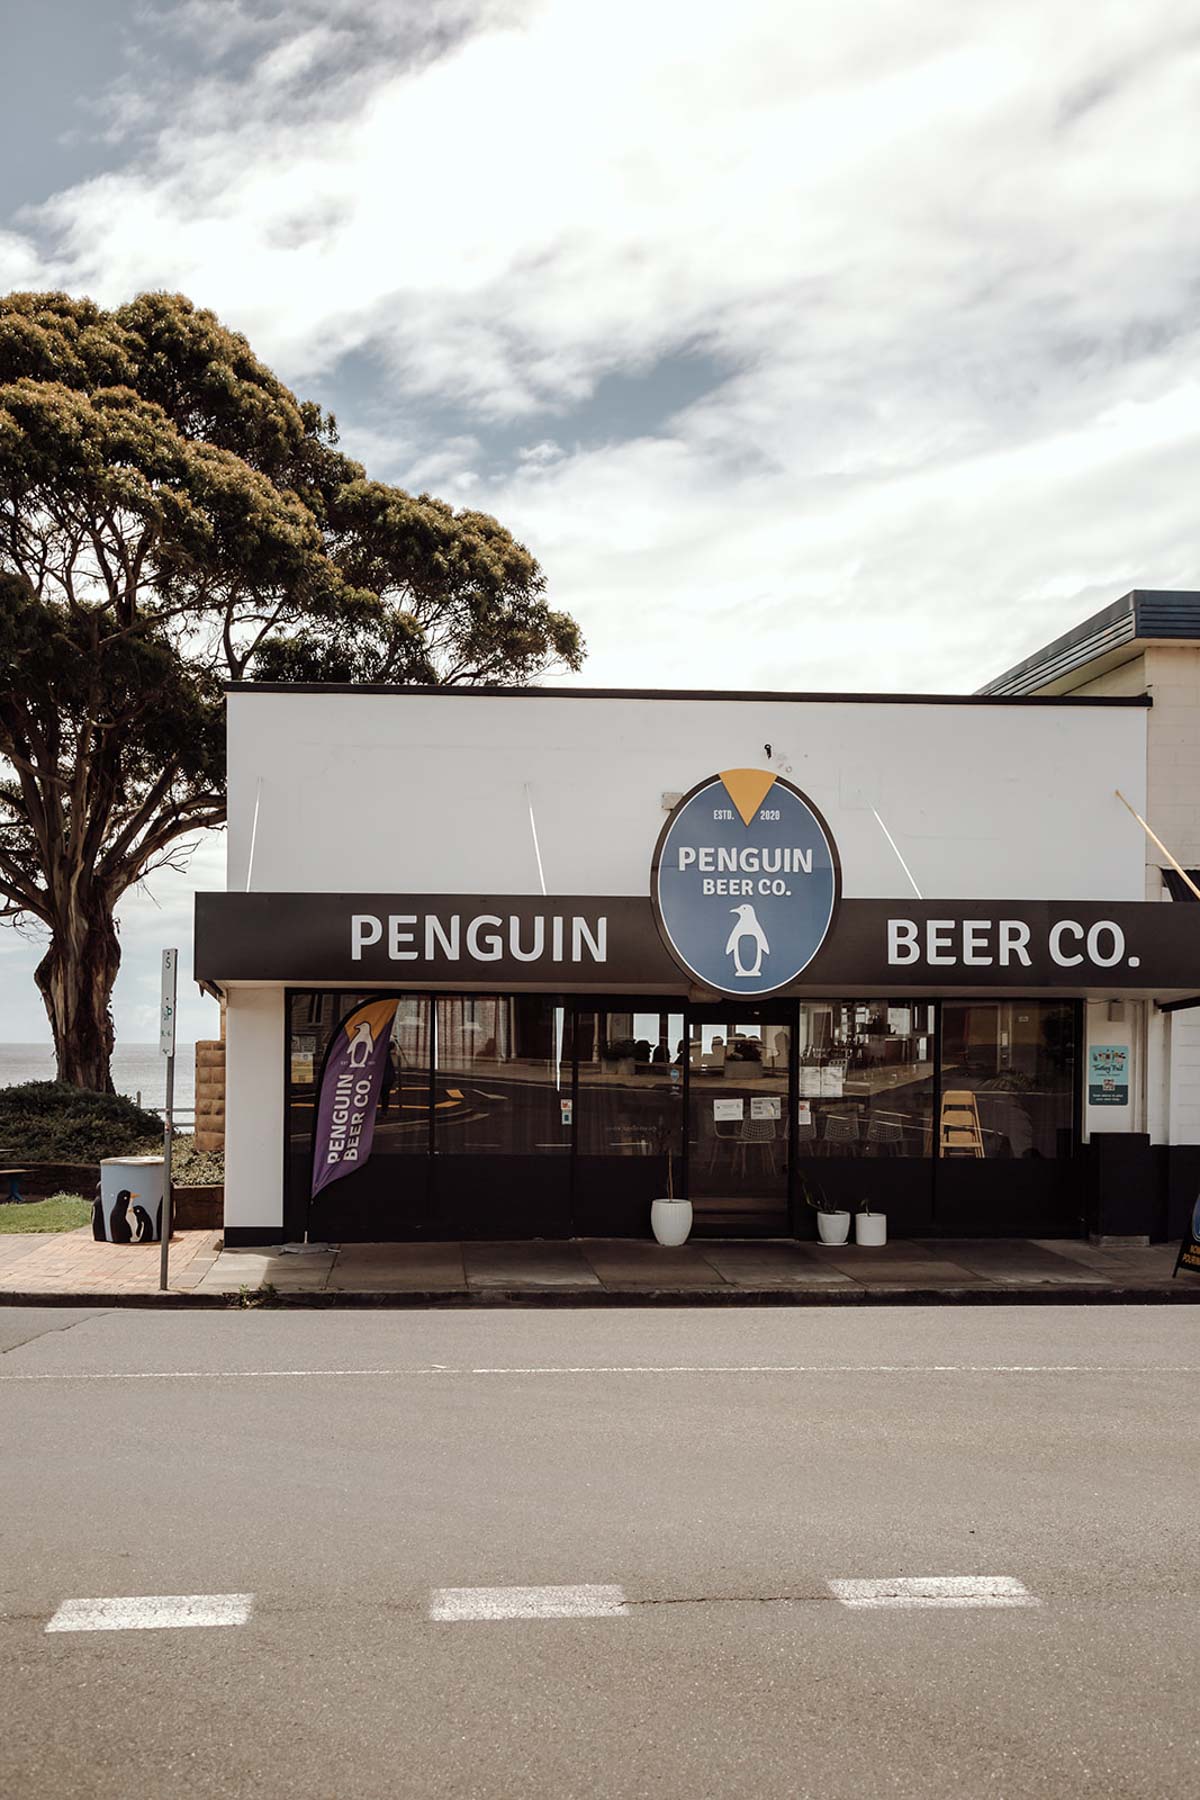 Experience North West Tasmania's finest brews with Coastline Tours and Penguin Beer Company. Immerse in guided tours that blend captivating landscapes, craft beer delights, and the warm hospitality of our coastal region."